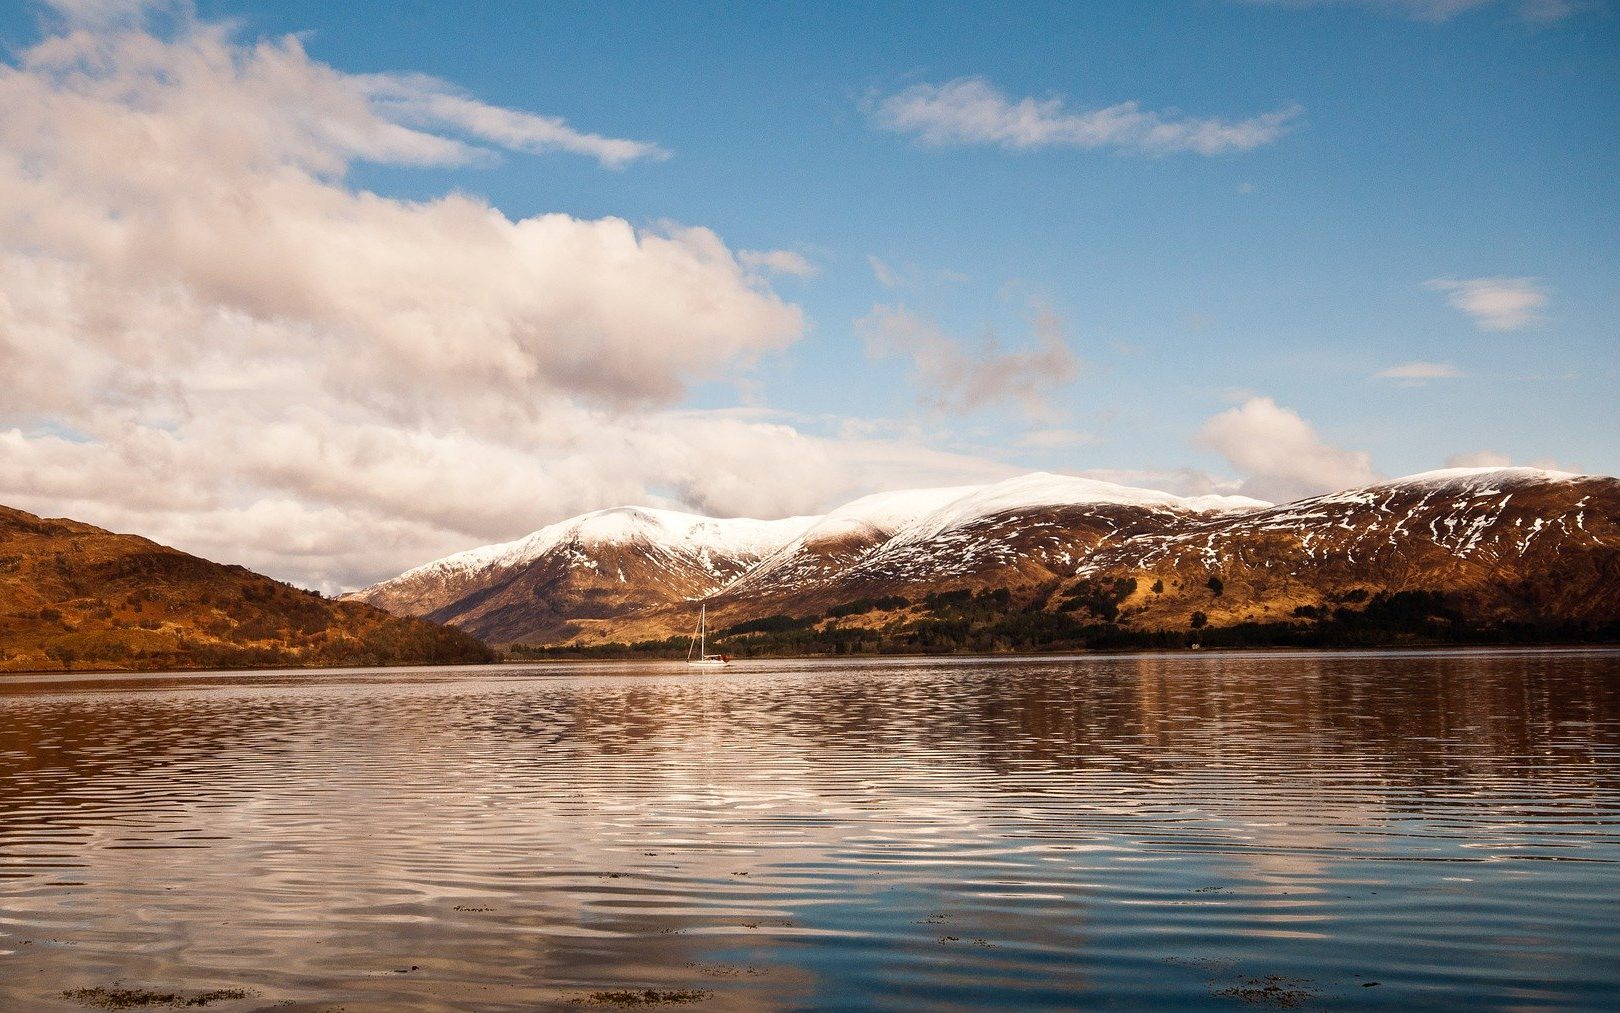 Loch Lomond Lake and snowy mountains